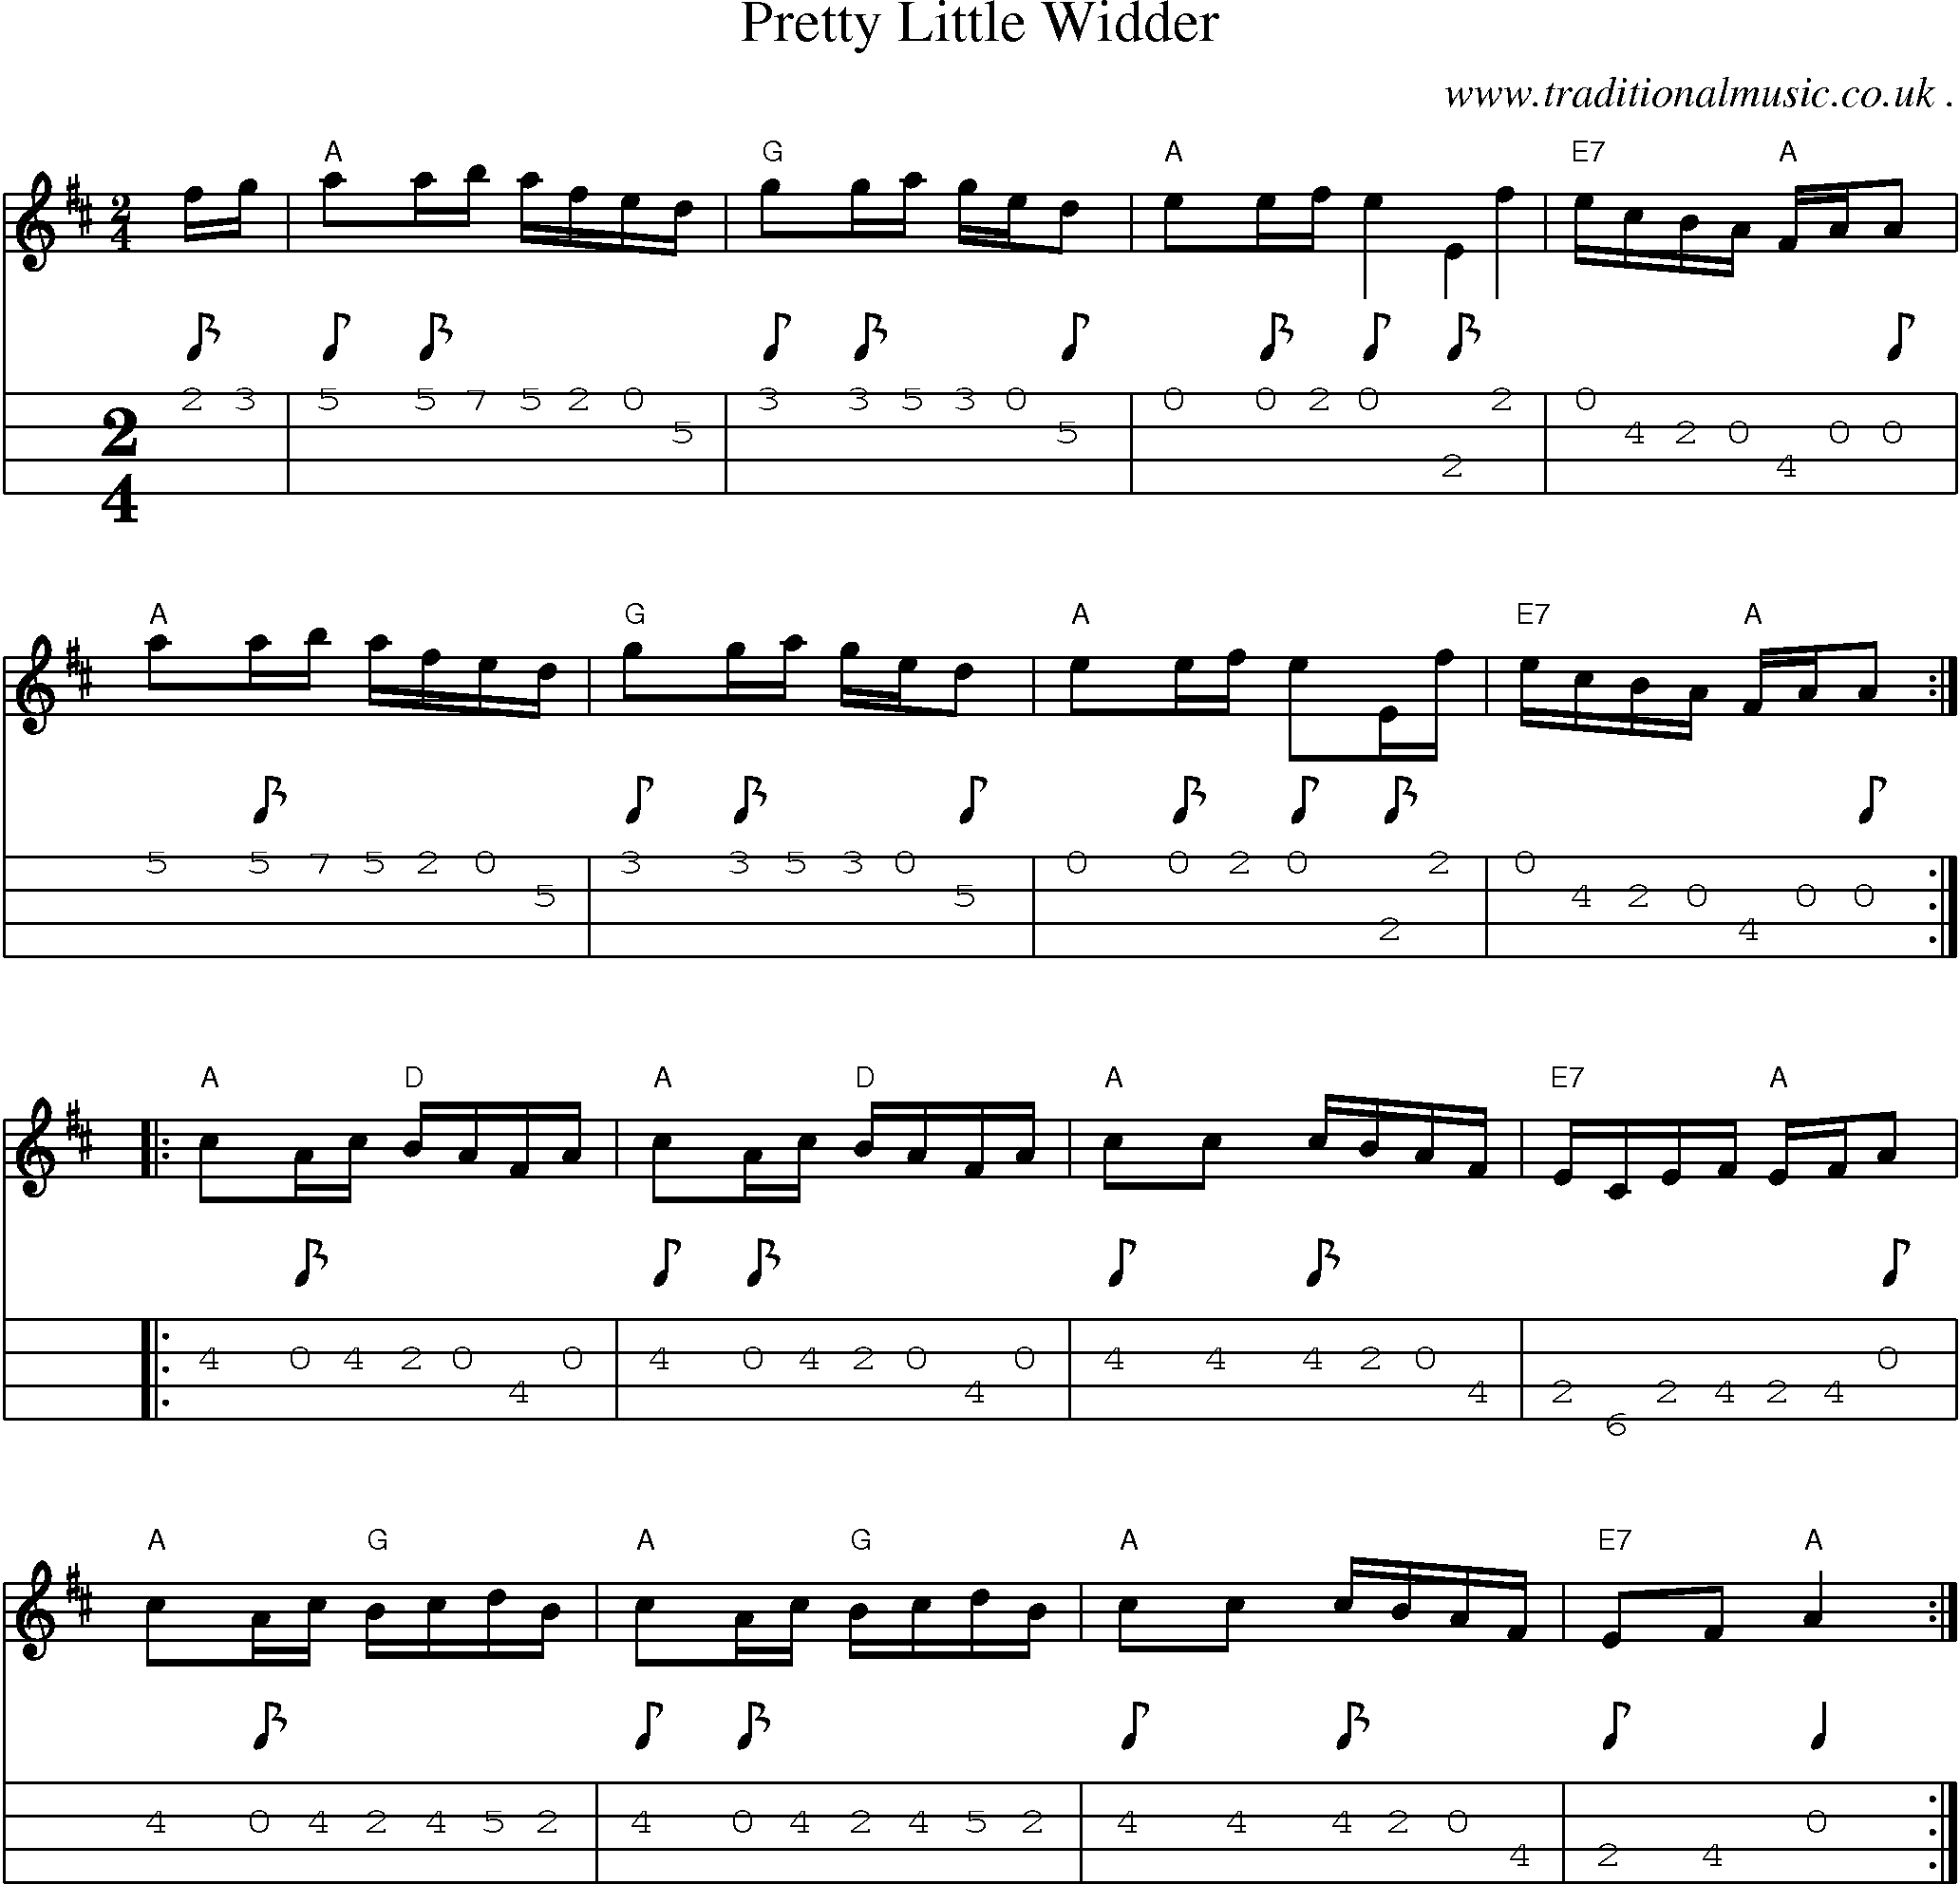 Music Score and Mandolin Tabs for Pretty Little Widder